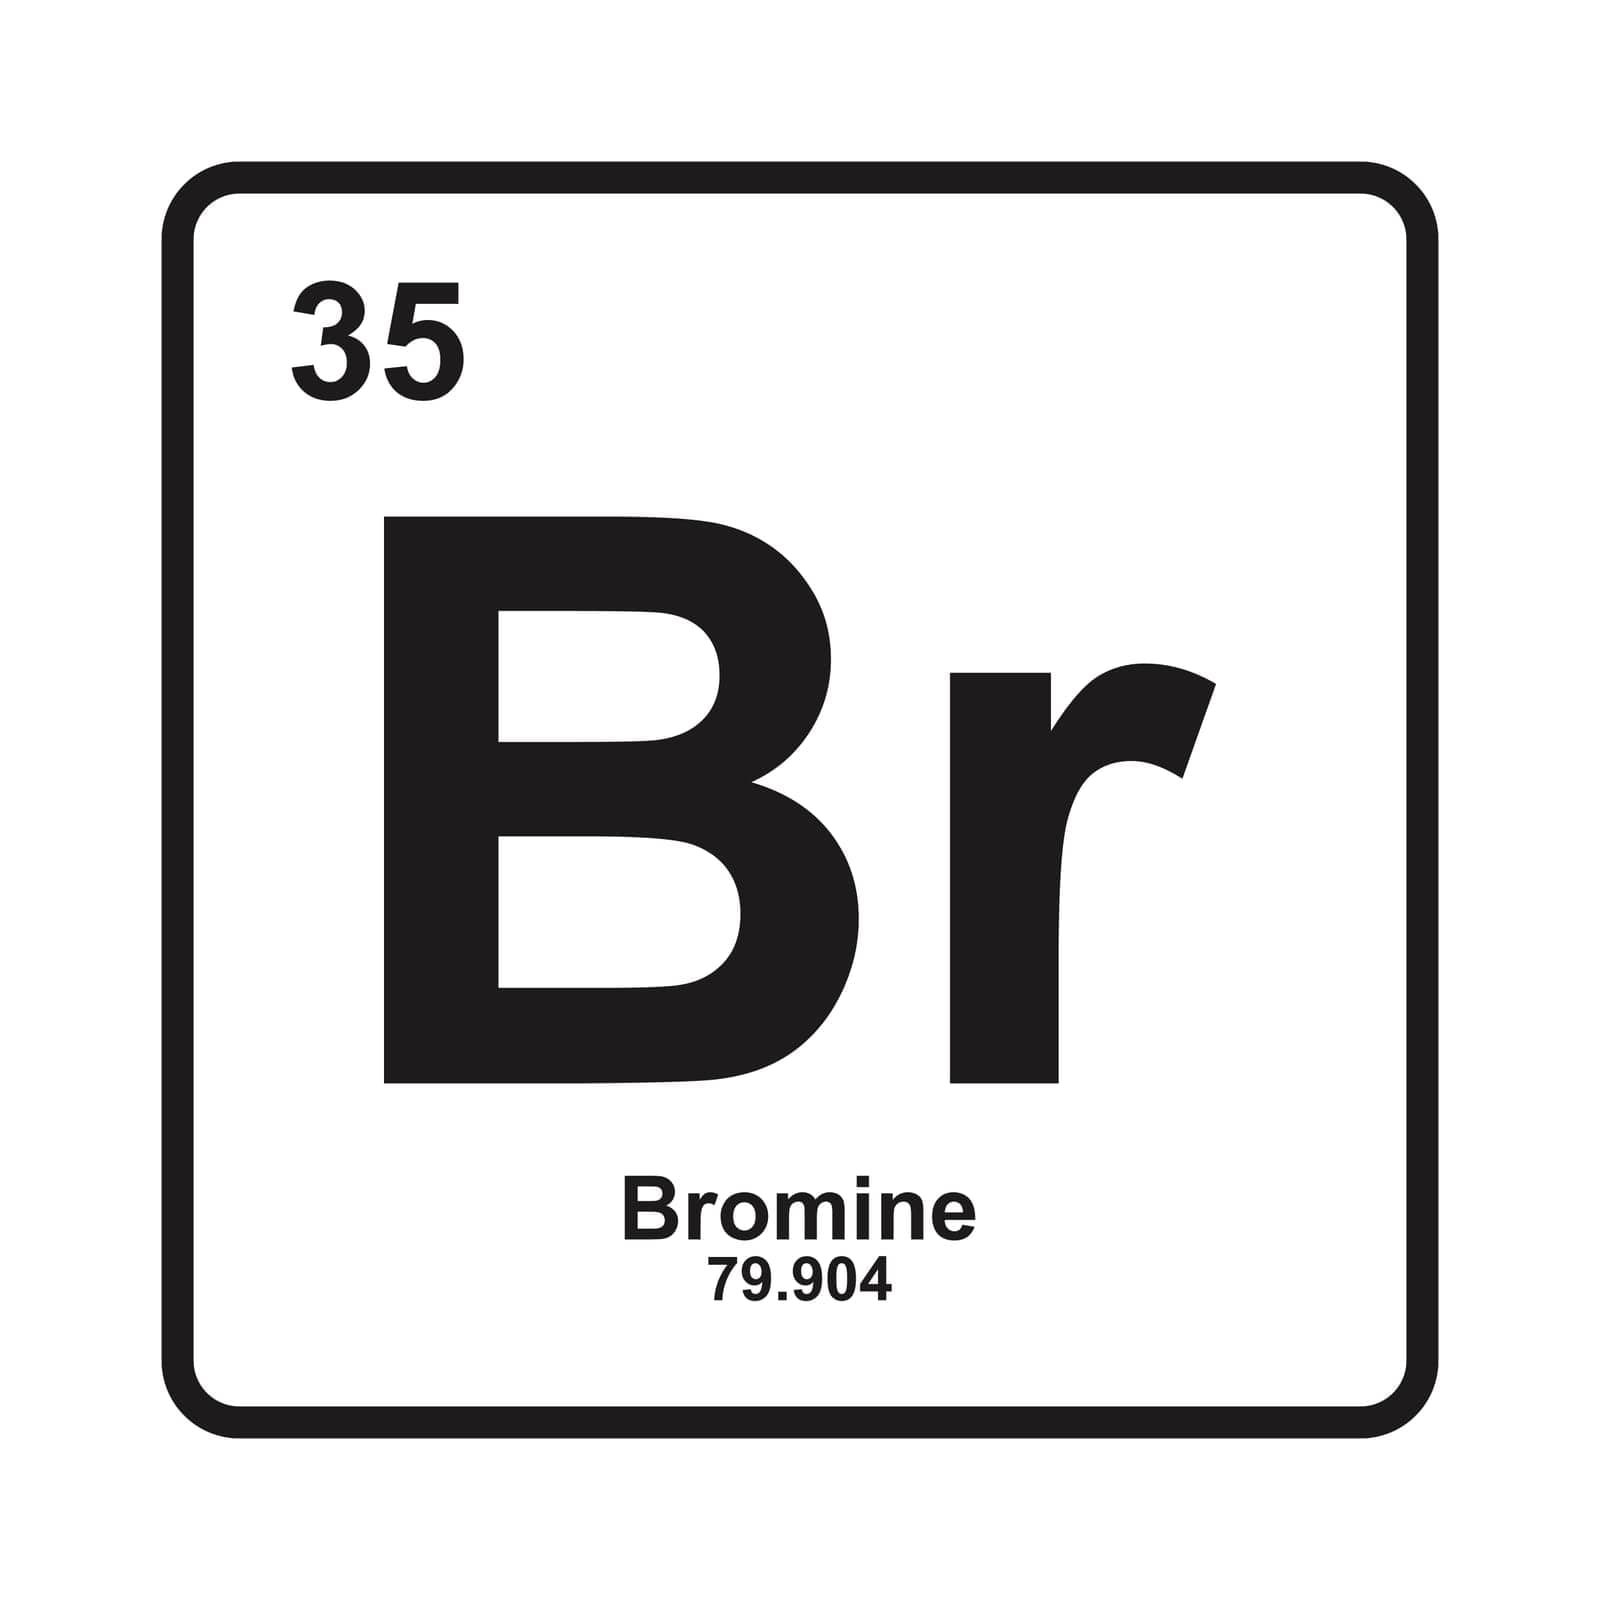 Bromine icon, chemical element in the periodic table.